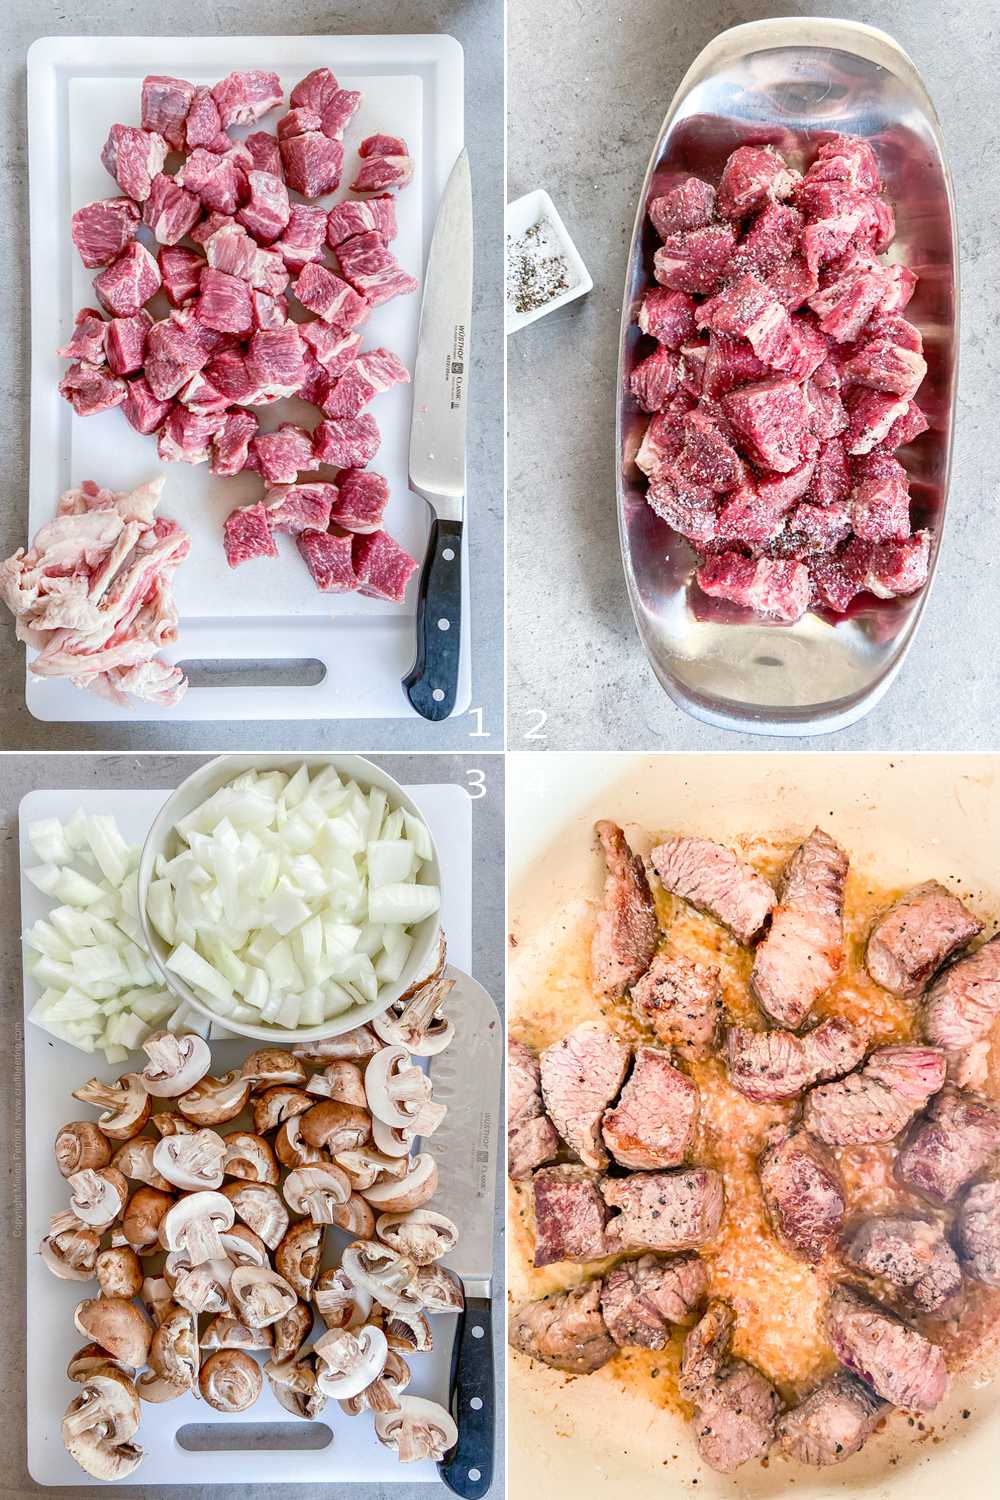 Prep steps - cube the brisket, cut the mushrooms and onions, season and sear